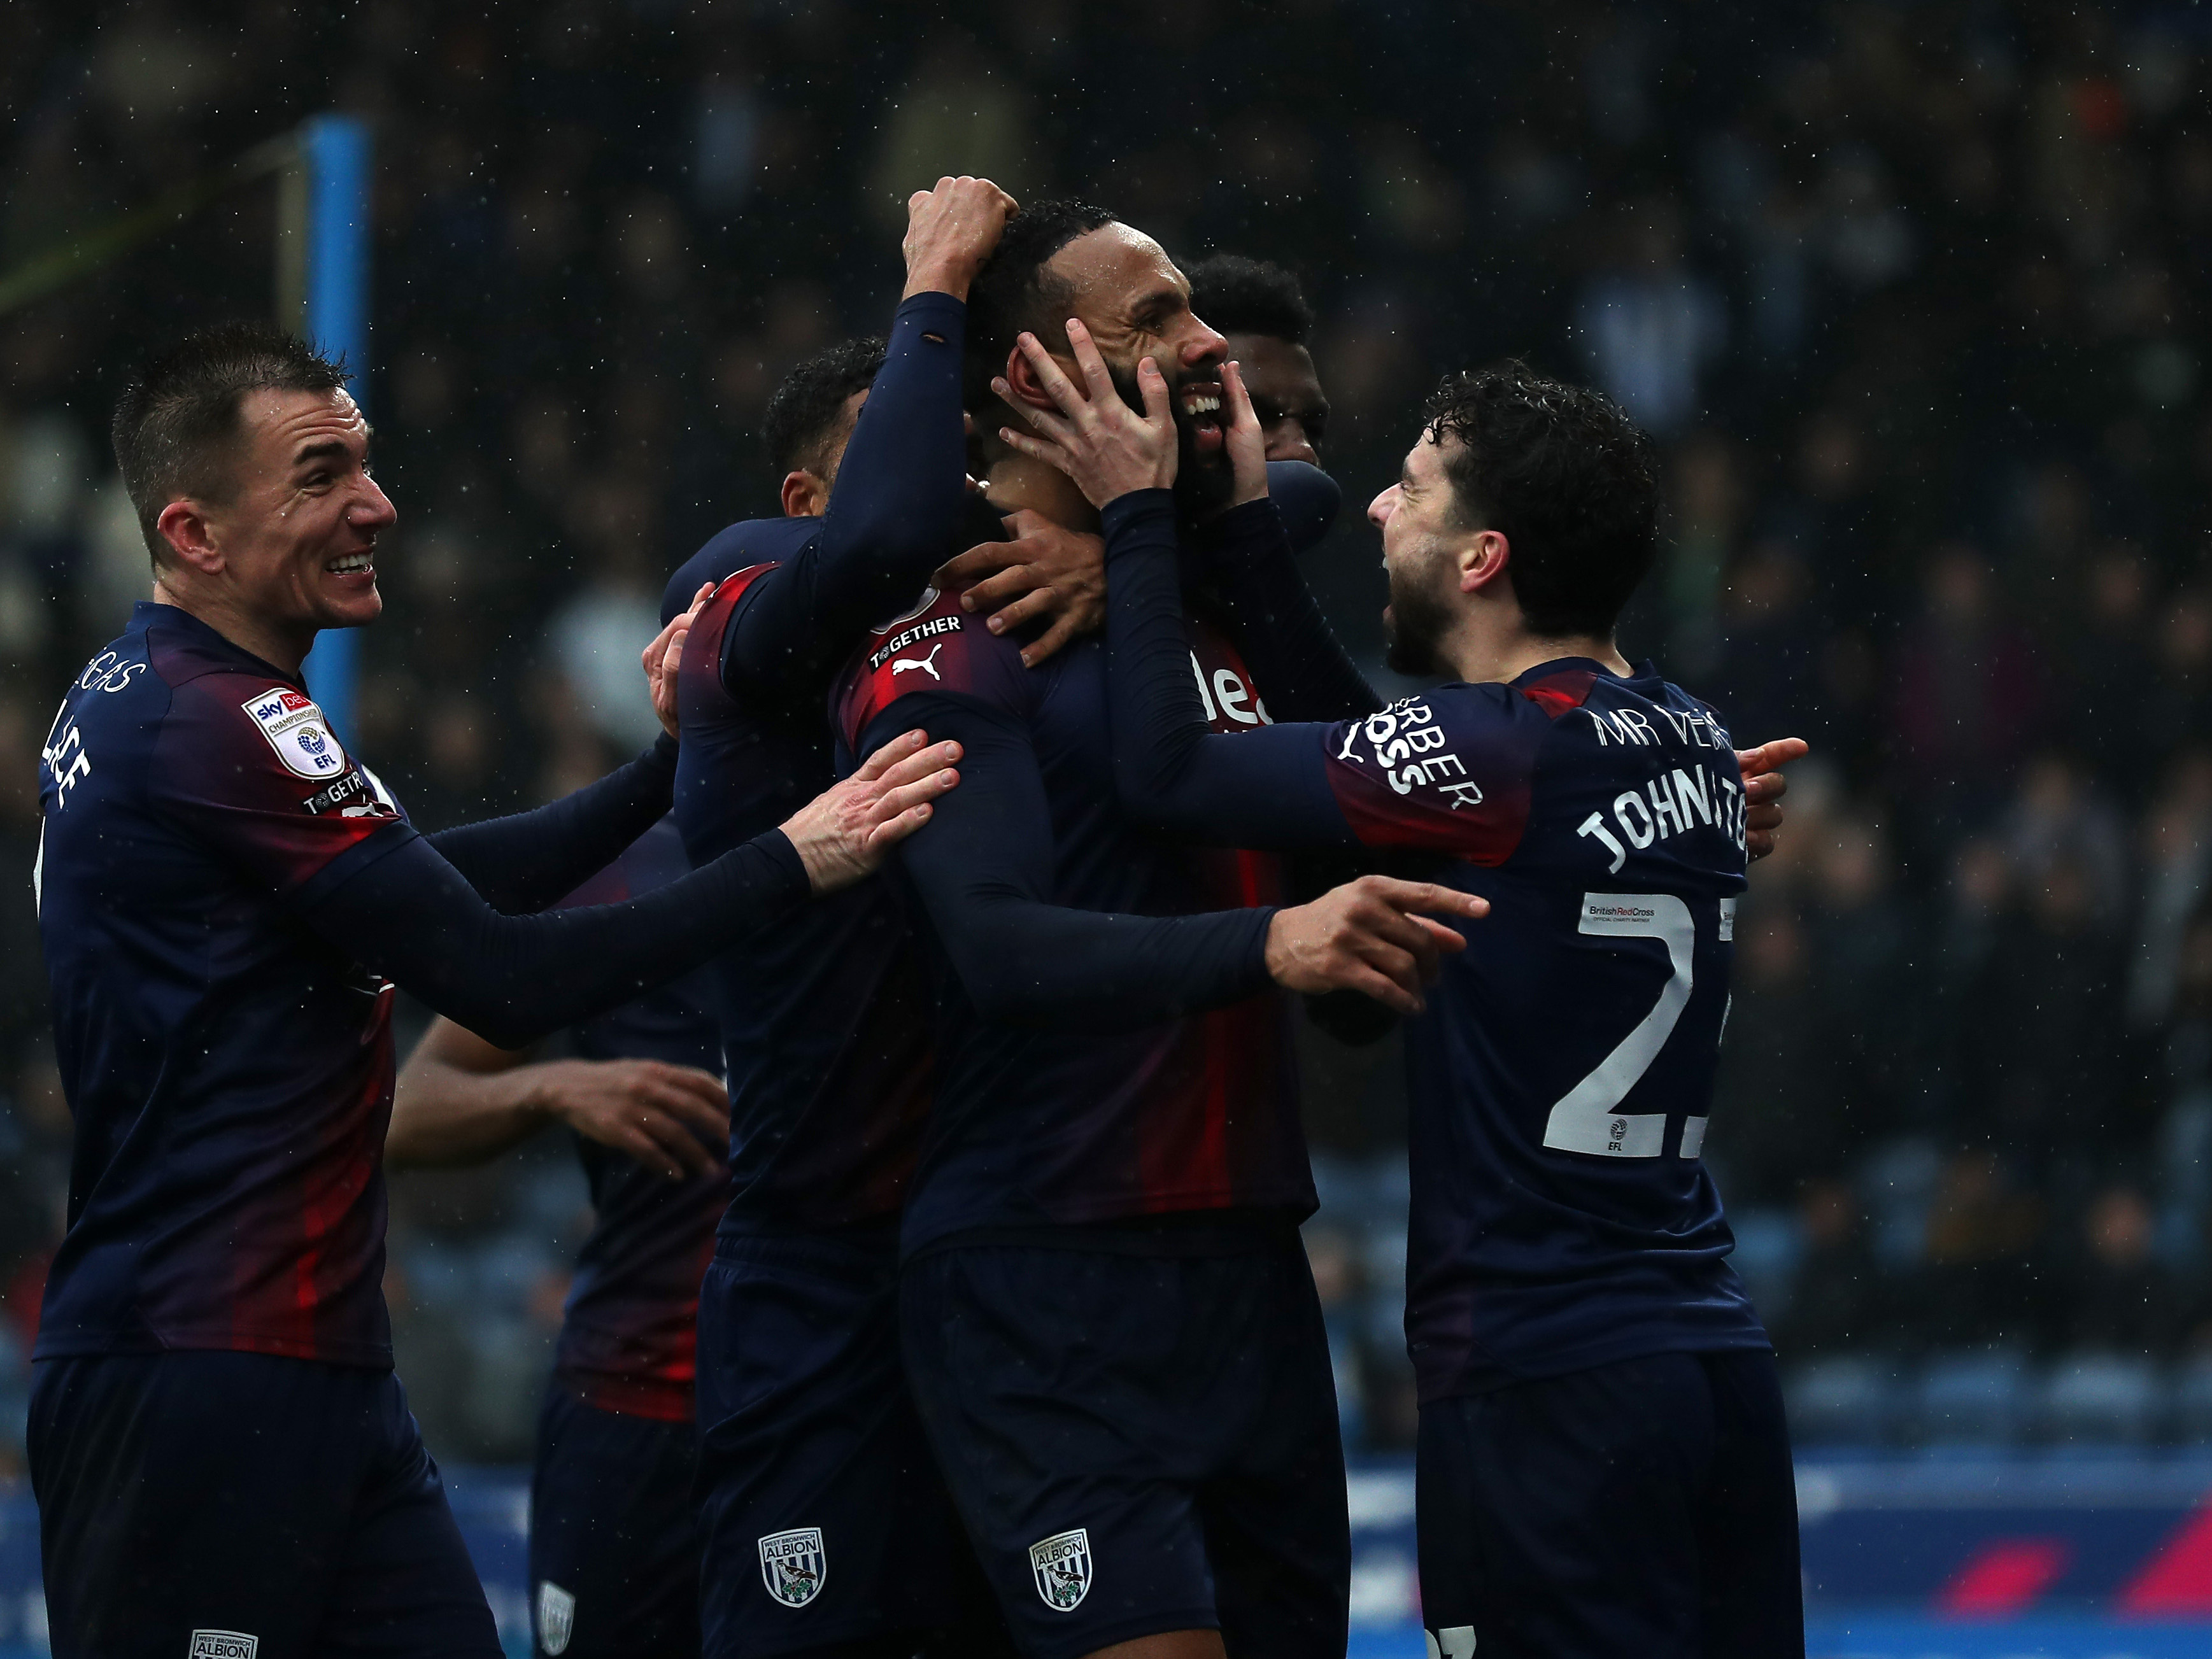 An image of Kyle Bartley and his teammates celebrating